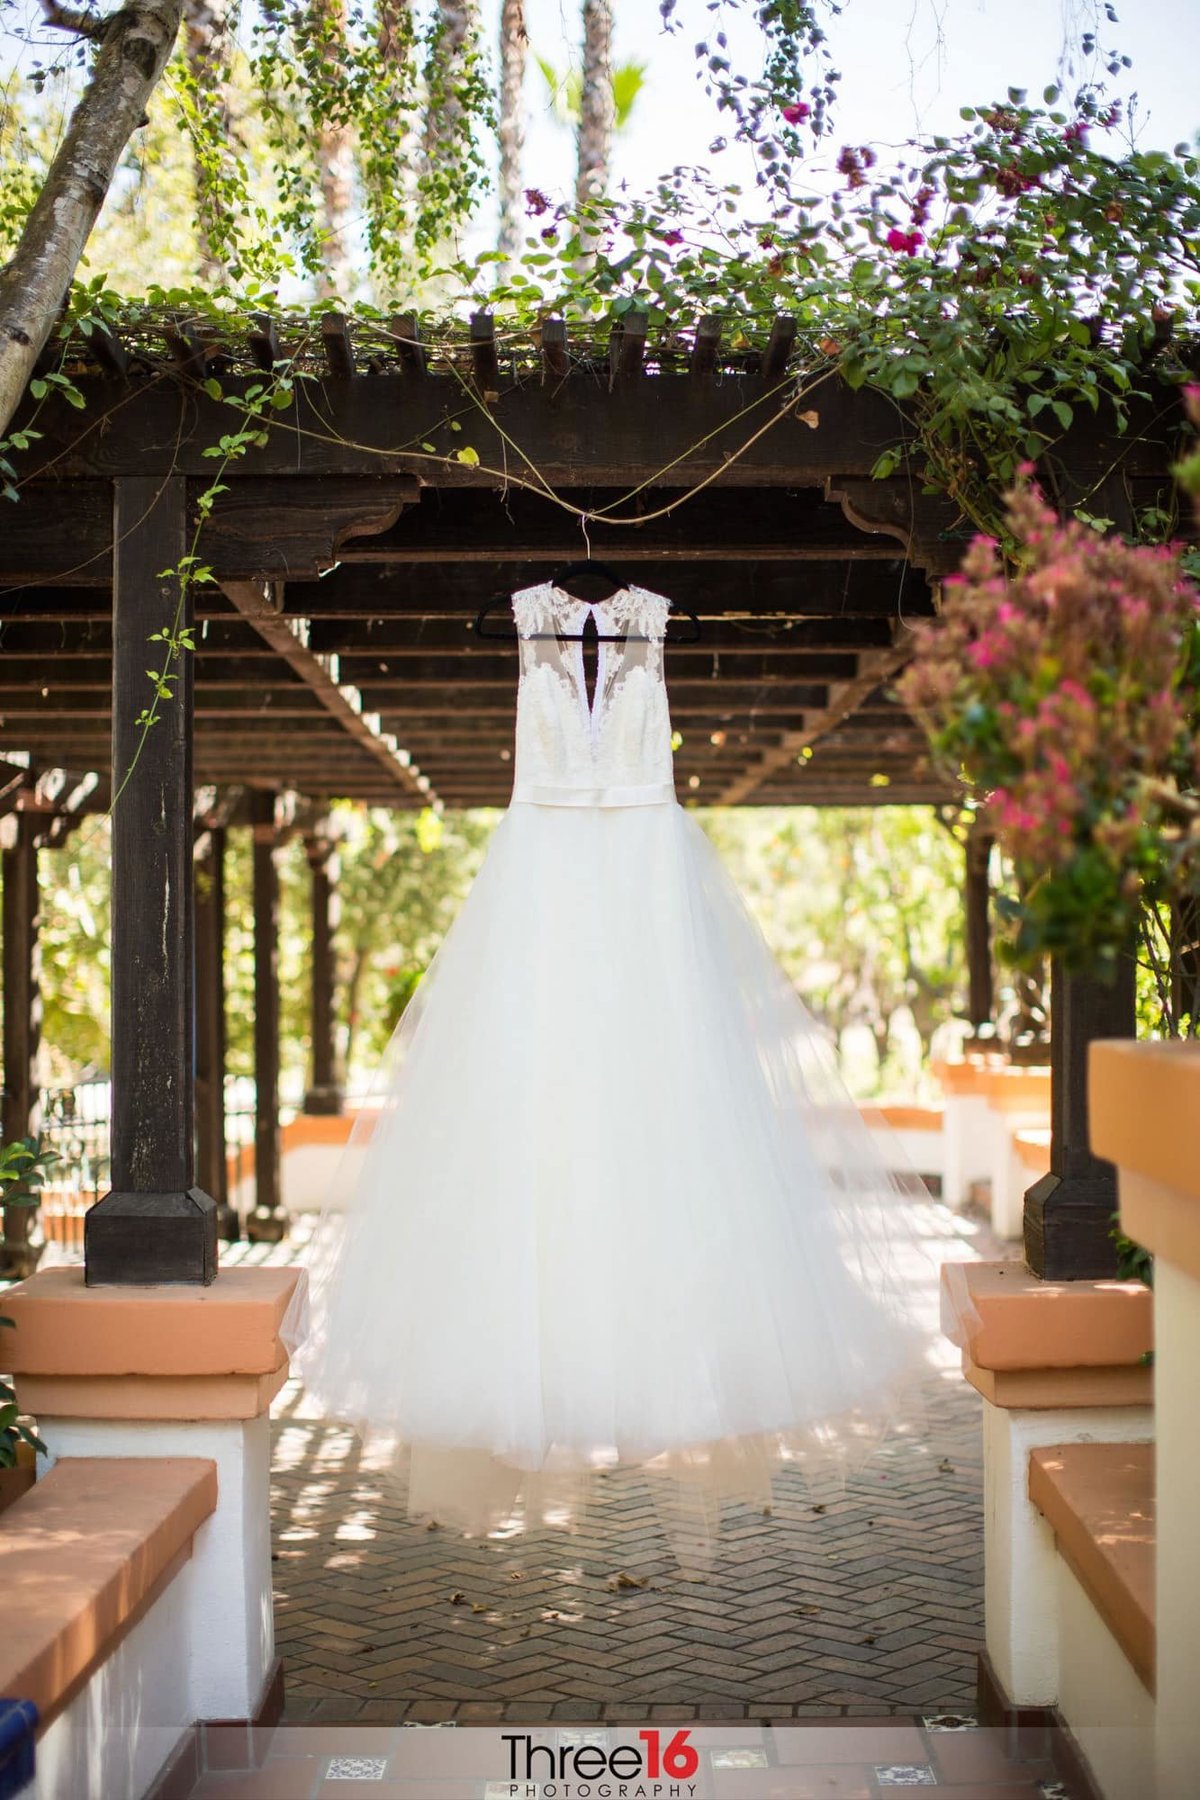 Beautiful Bridal Gown hangs on display off a patio trellis